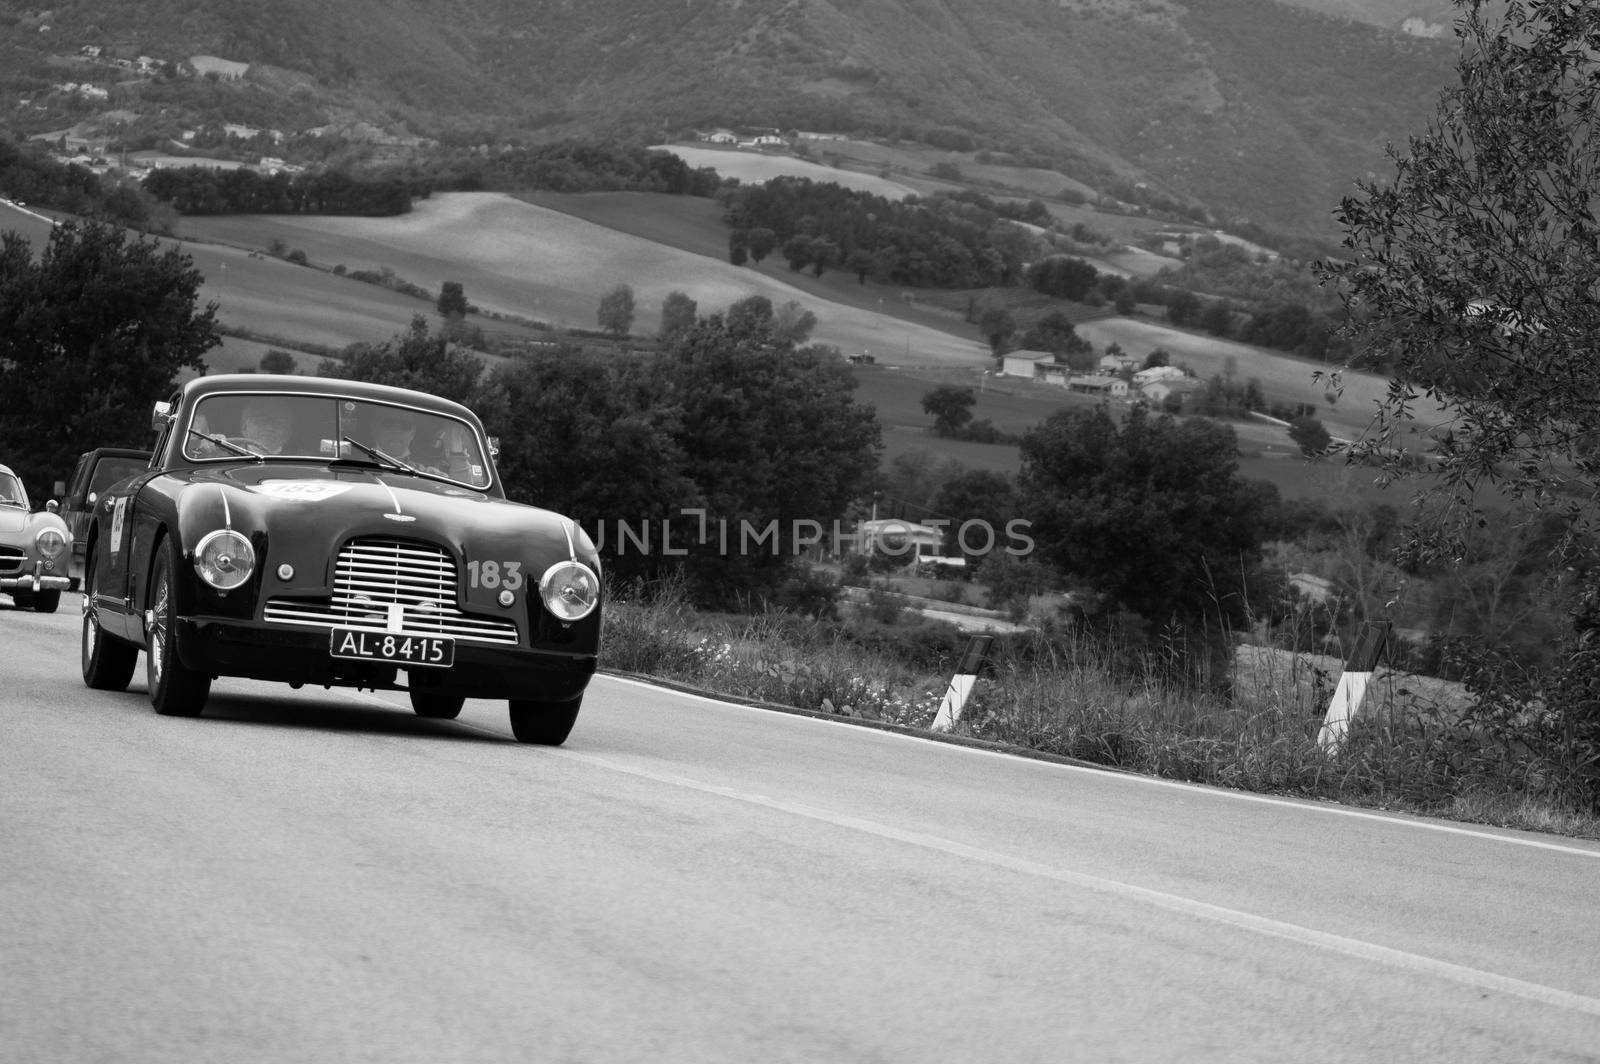 ASTON MARTIN DB 2 on an old racing car in rally Mille Miglia 2020 the famous italian historical race (1927-1957) by massimocampanari